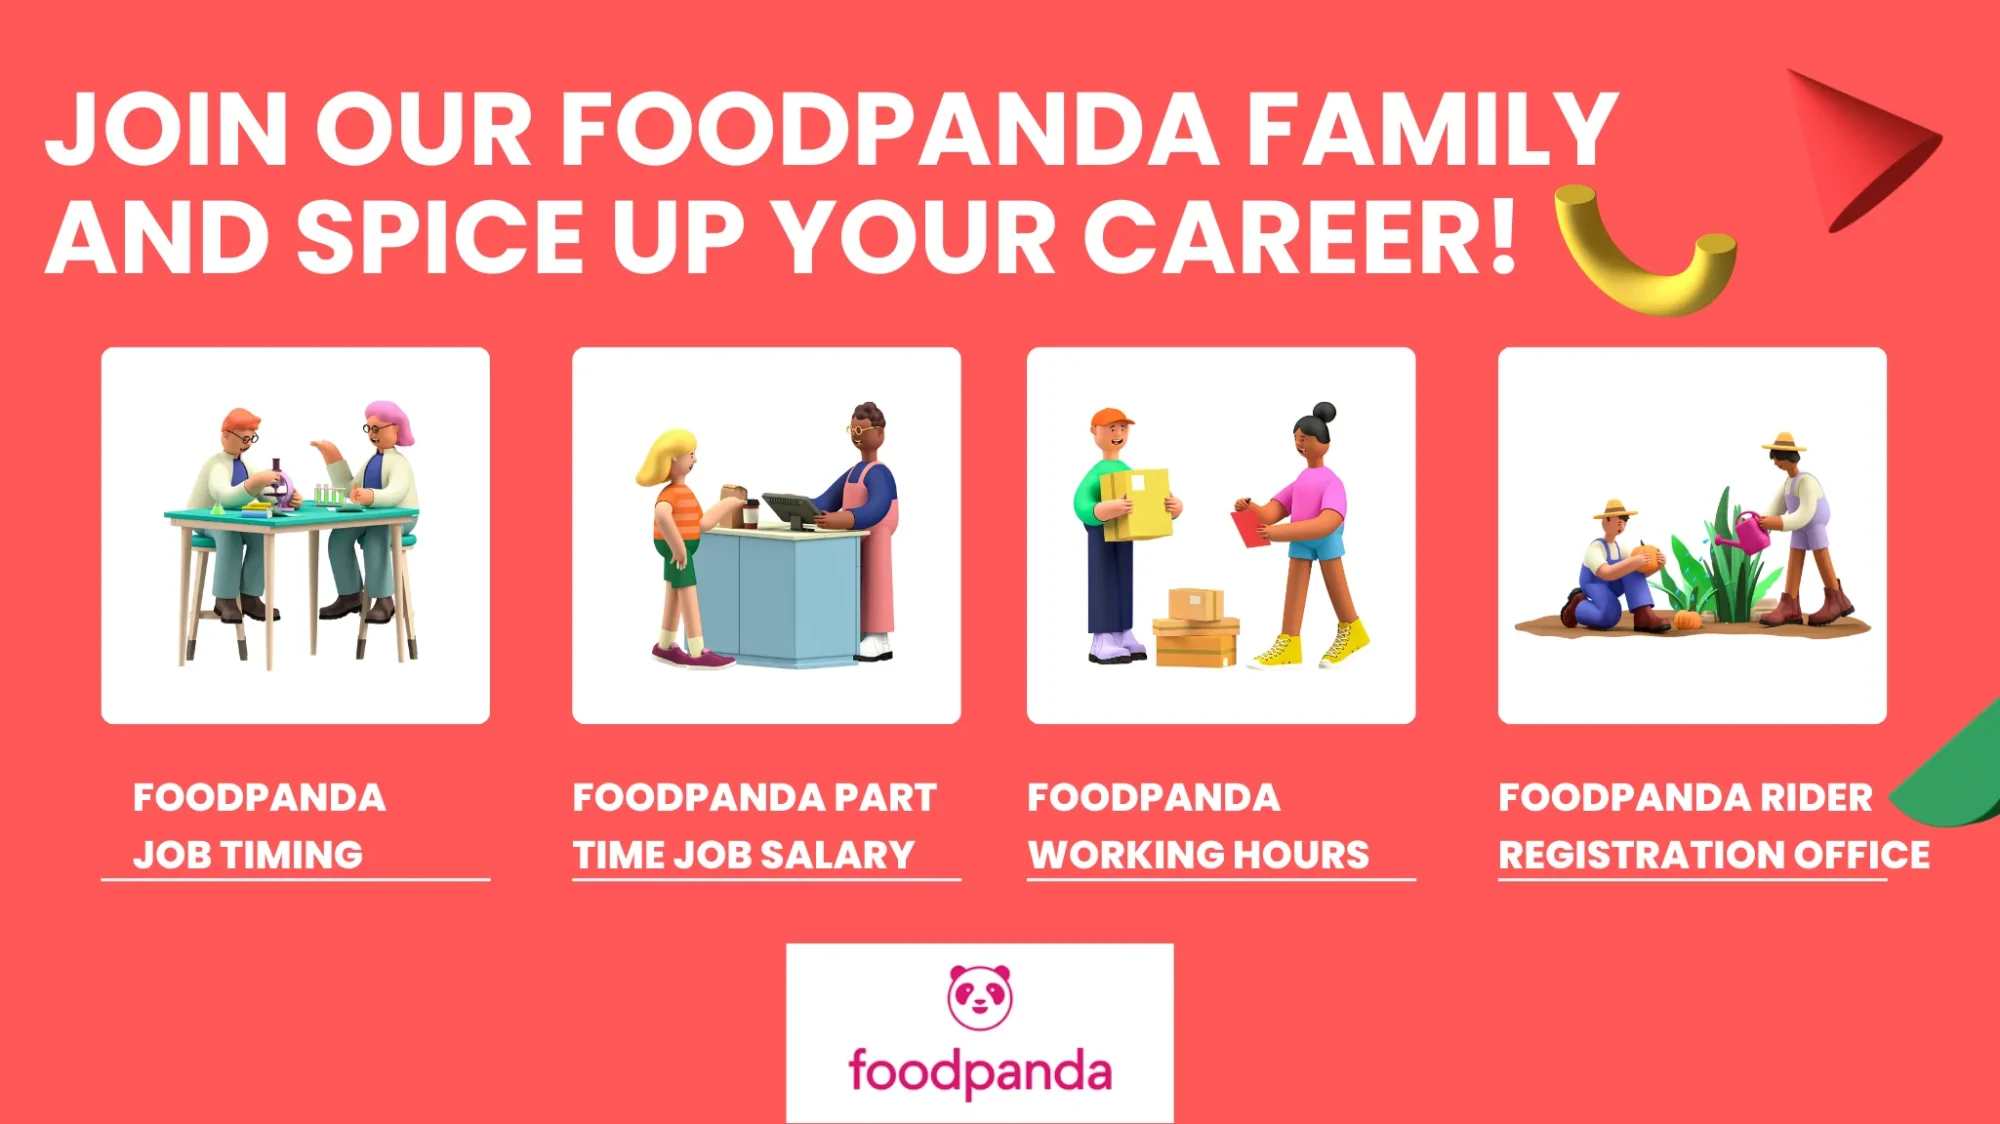 Savor Success - Join Our Foodpanda Family and Spice Up Your Career!